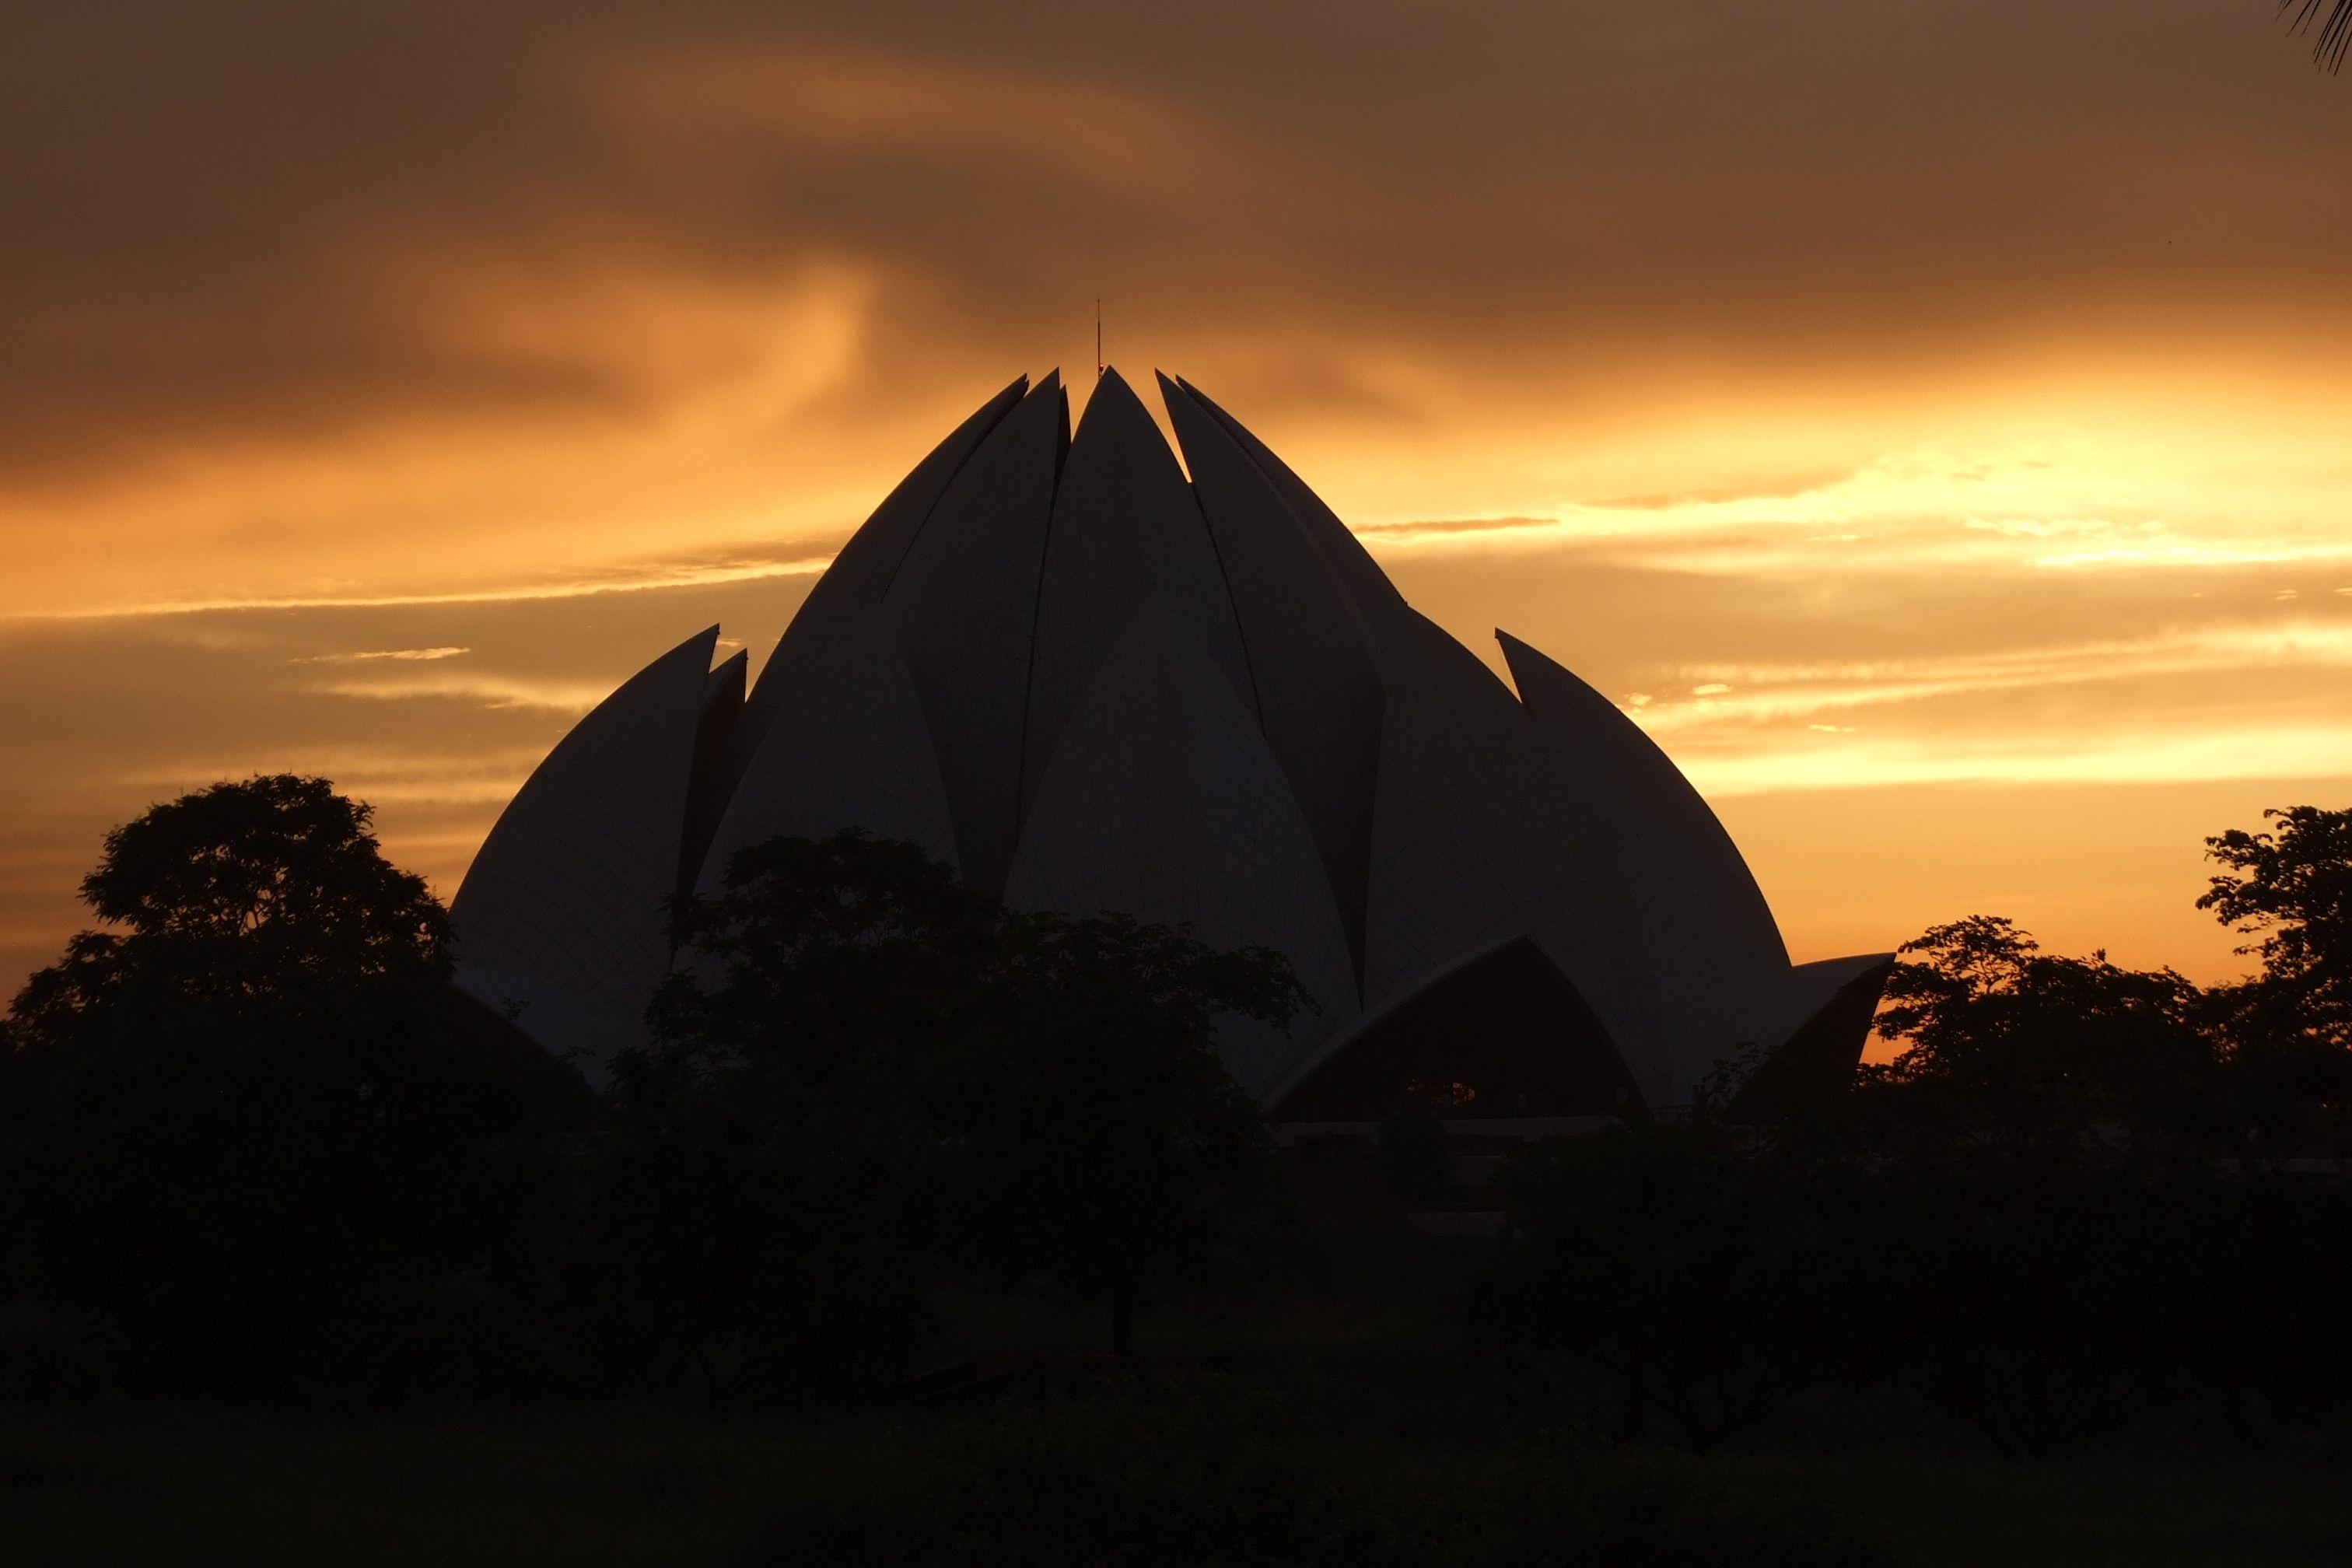 Lotus Temple Historical Facts and Picture. The History Hub